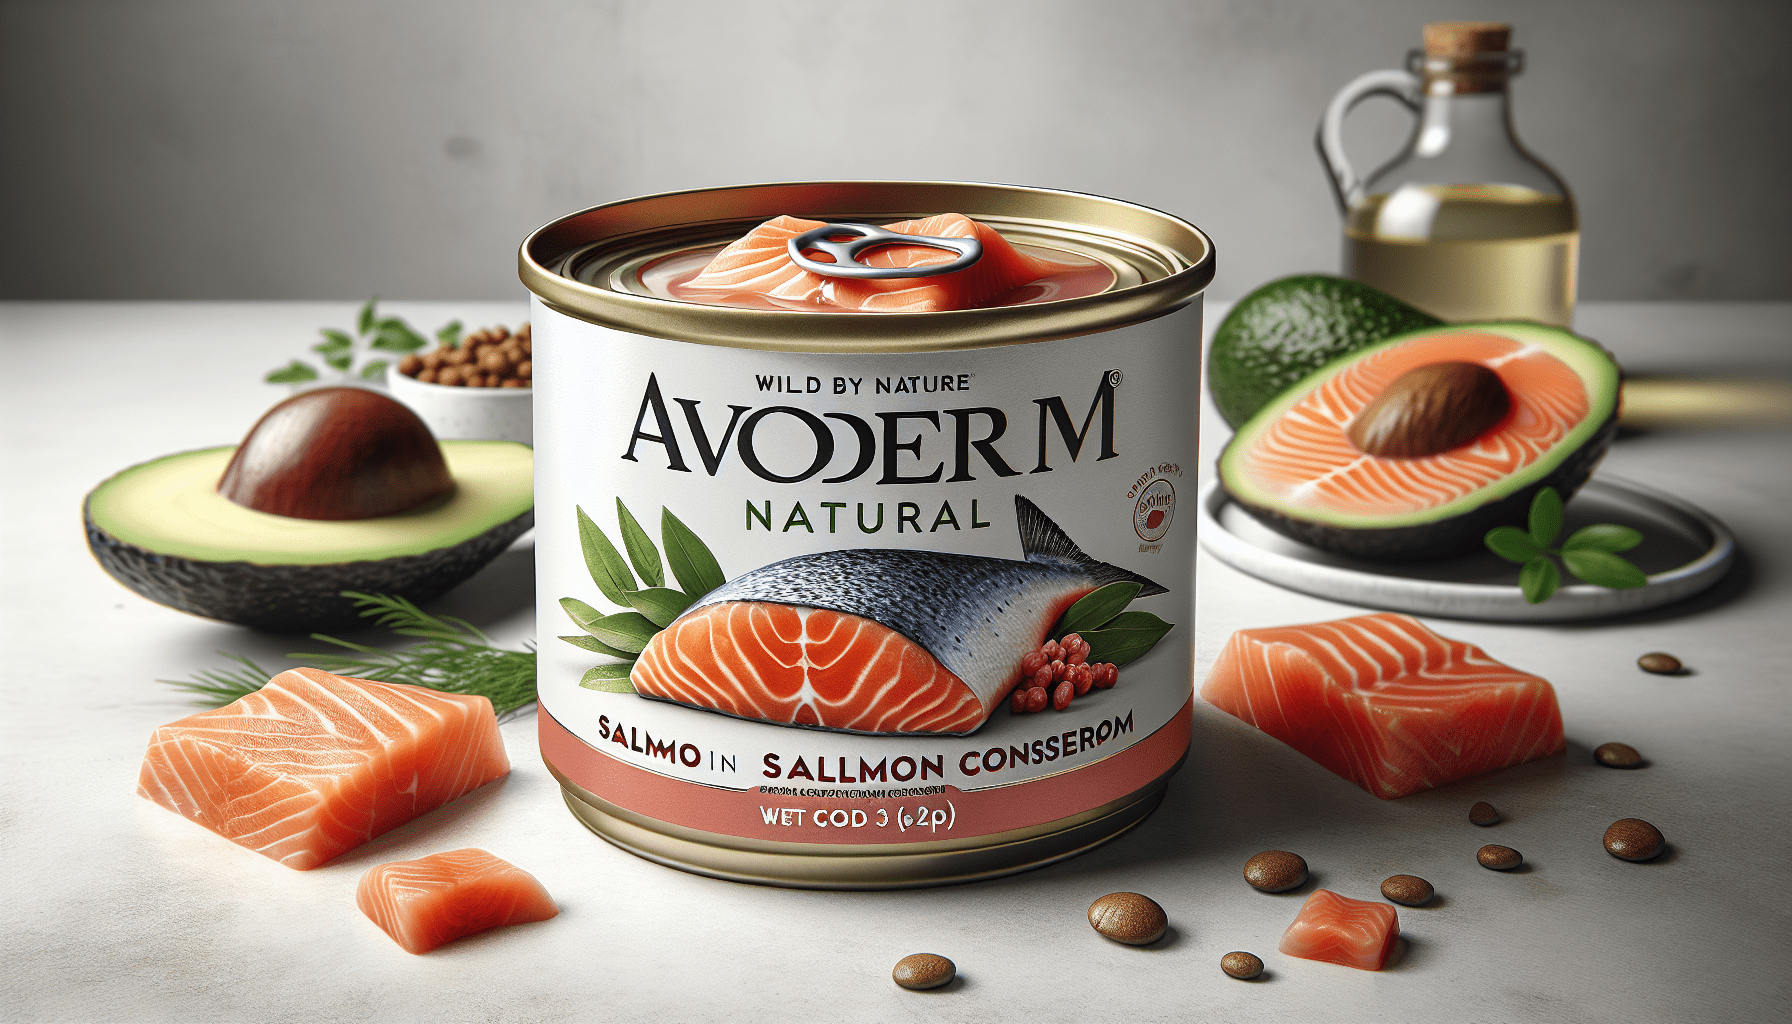 AvoDerm Natural Wild By Nature Salmon in Salmon Consomme Wet Cat Food 3oz Review